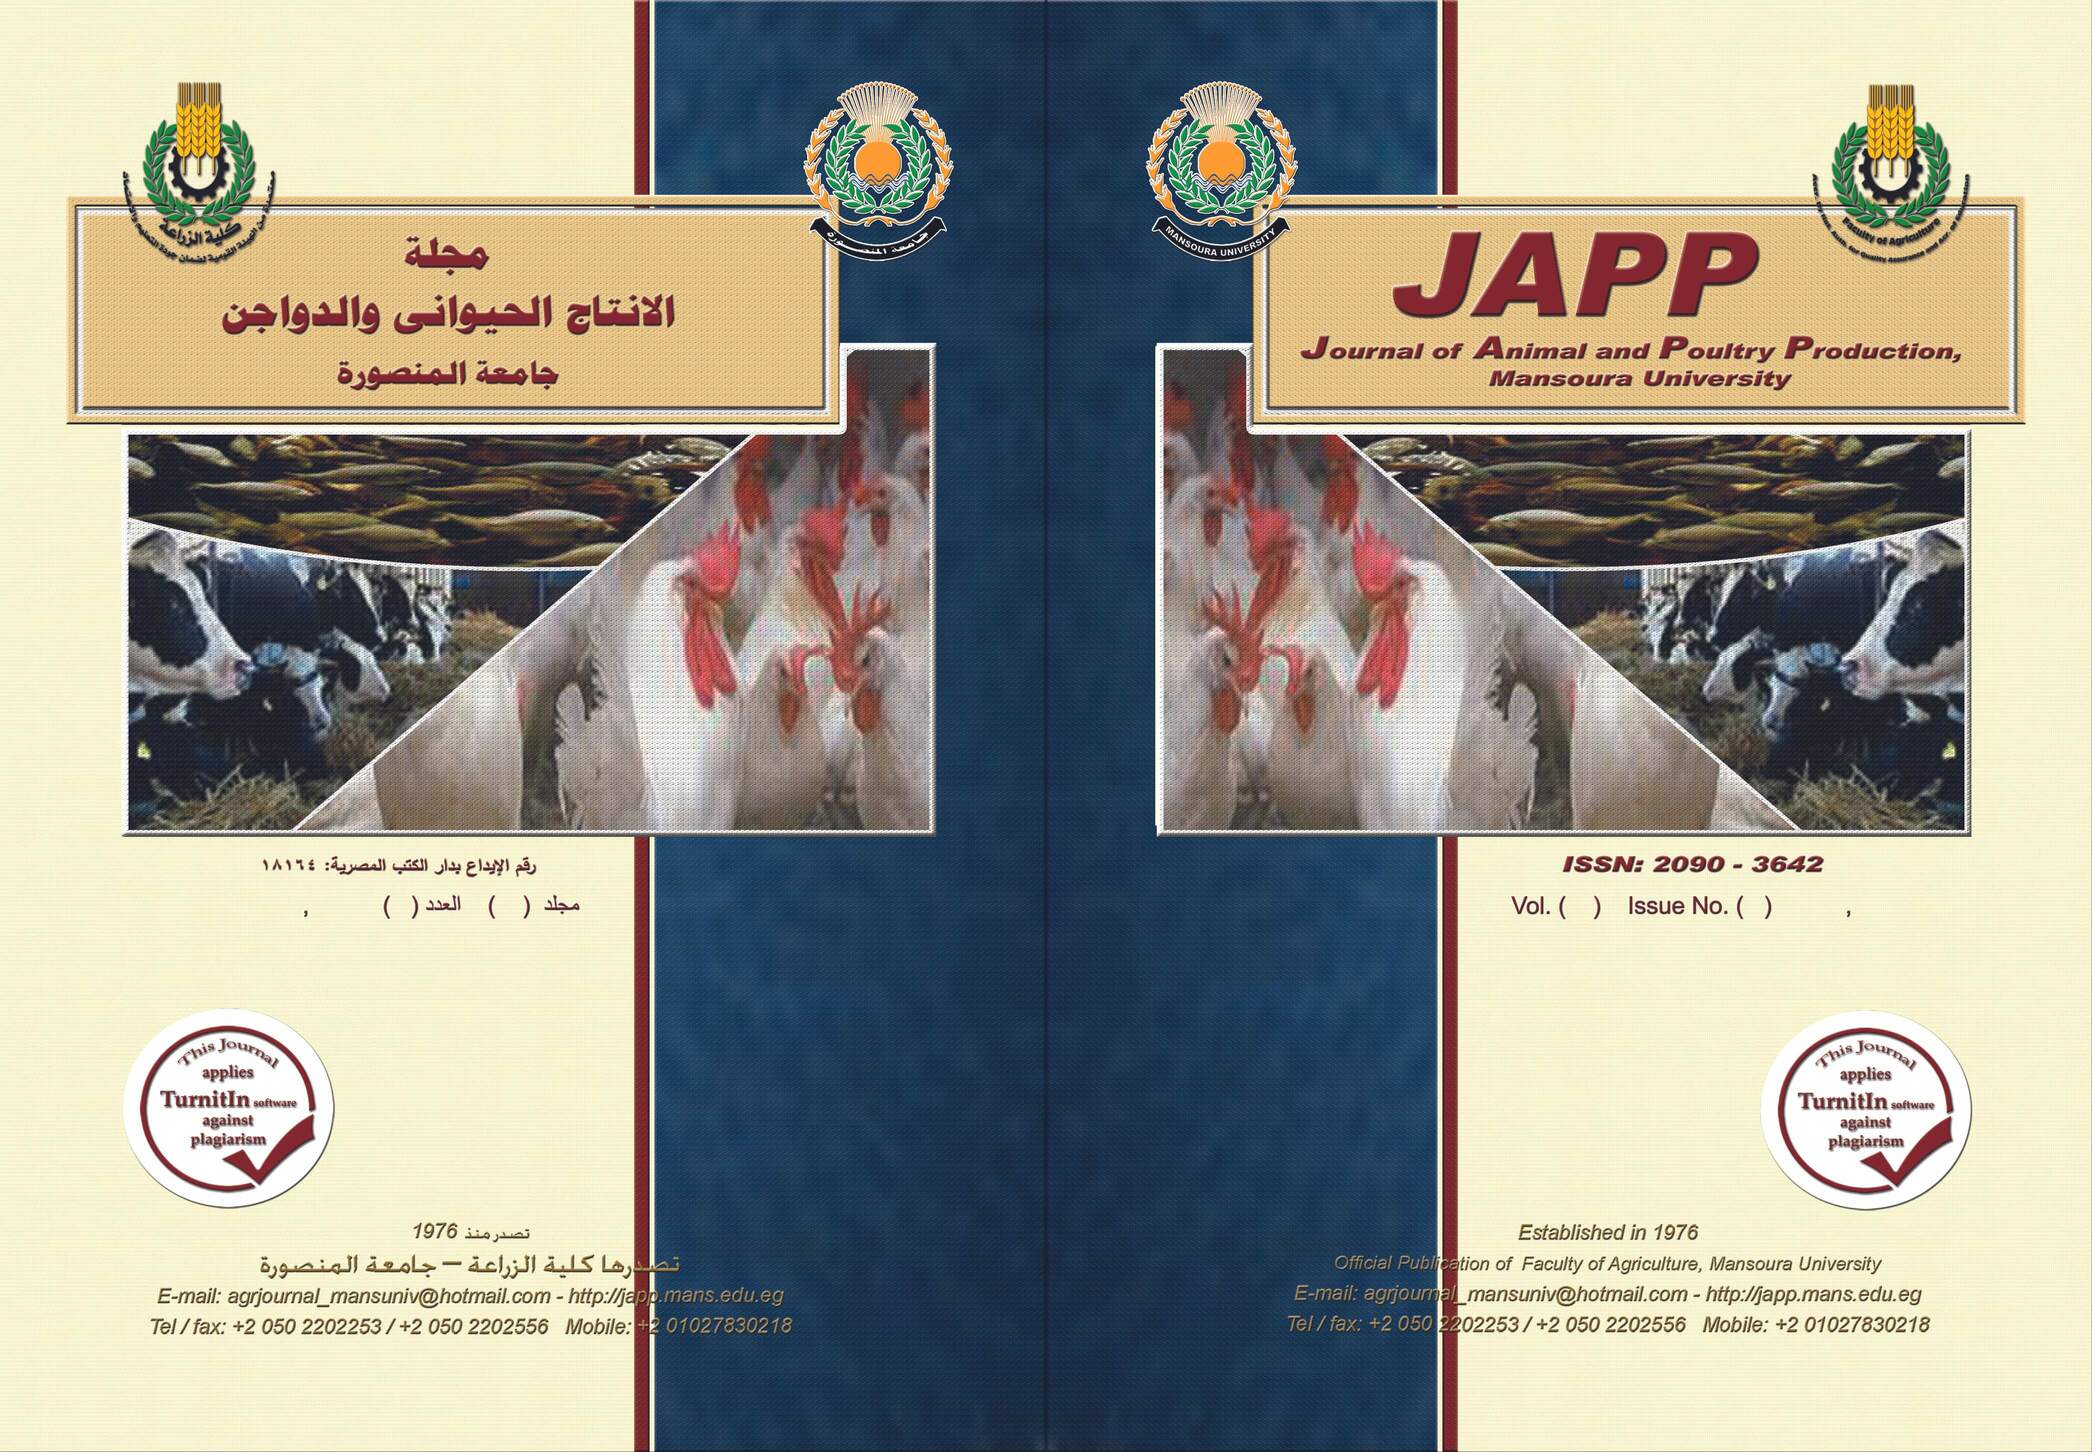 Journal of Animal and Poultry Production